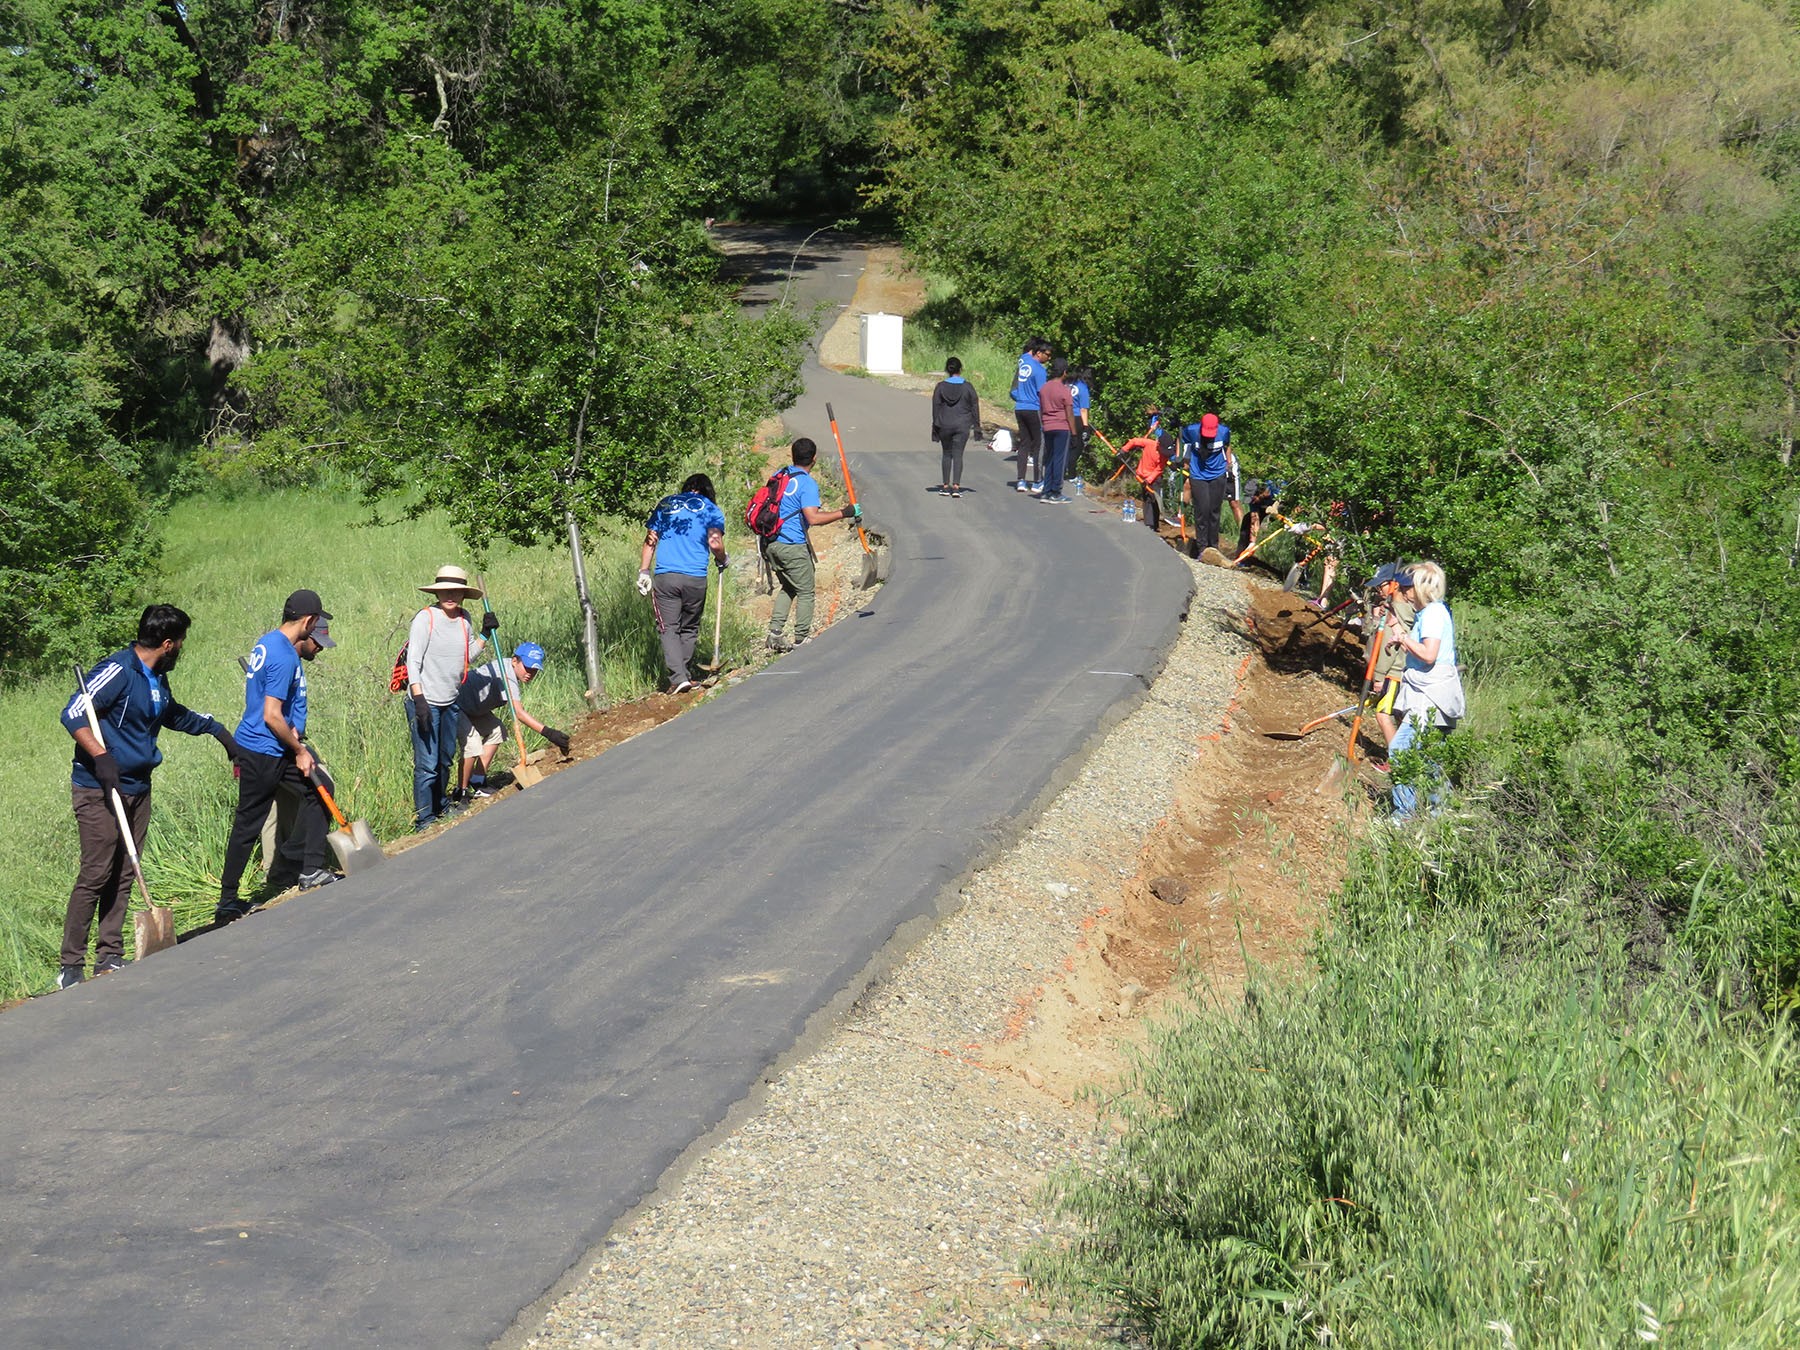 Volunteers sought for 28th Trails Day projects Saturday